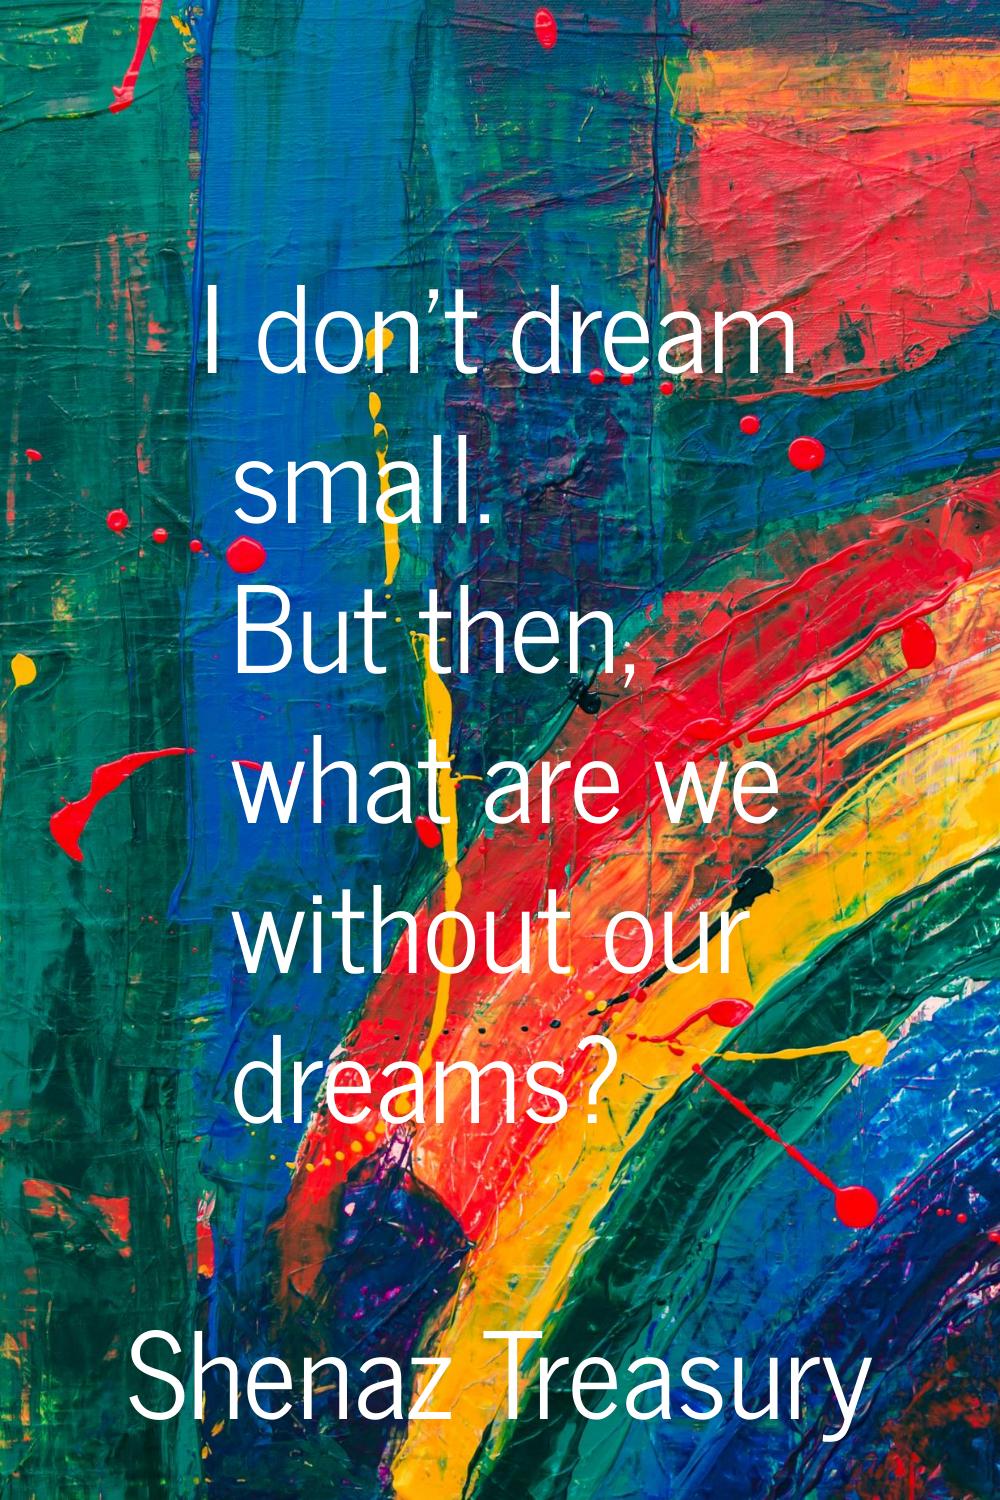 I don't dream small. But then, what are we without our dreams?